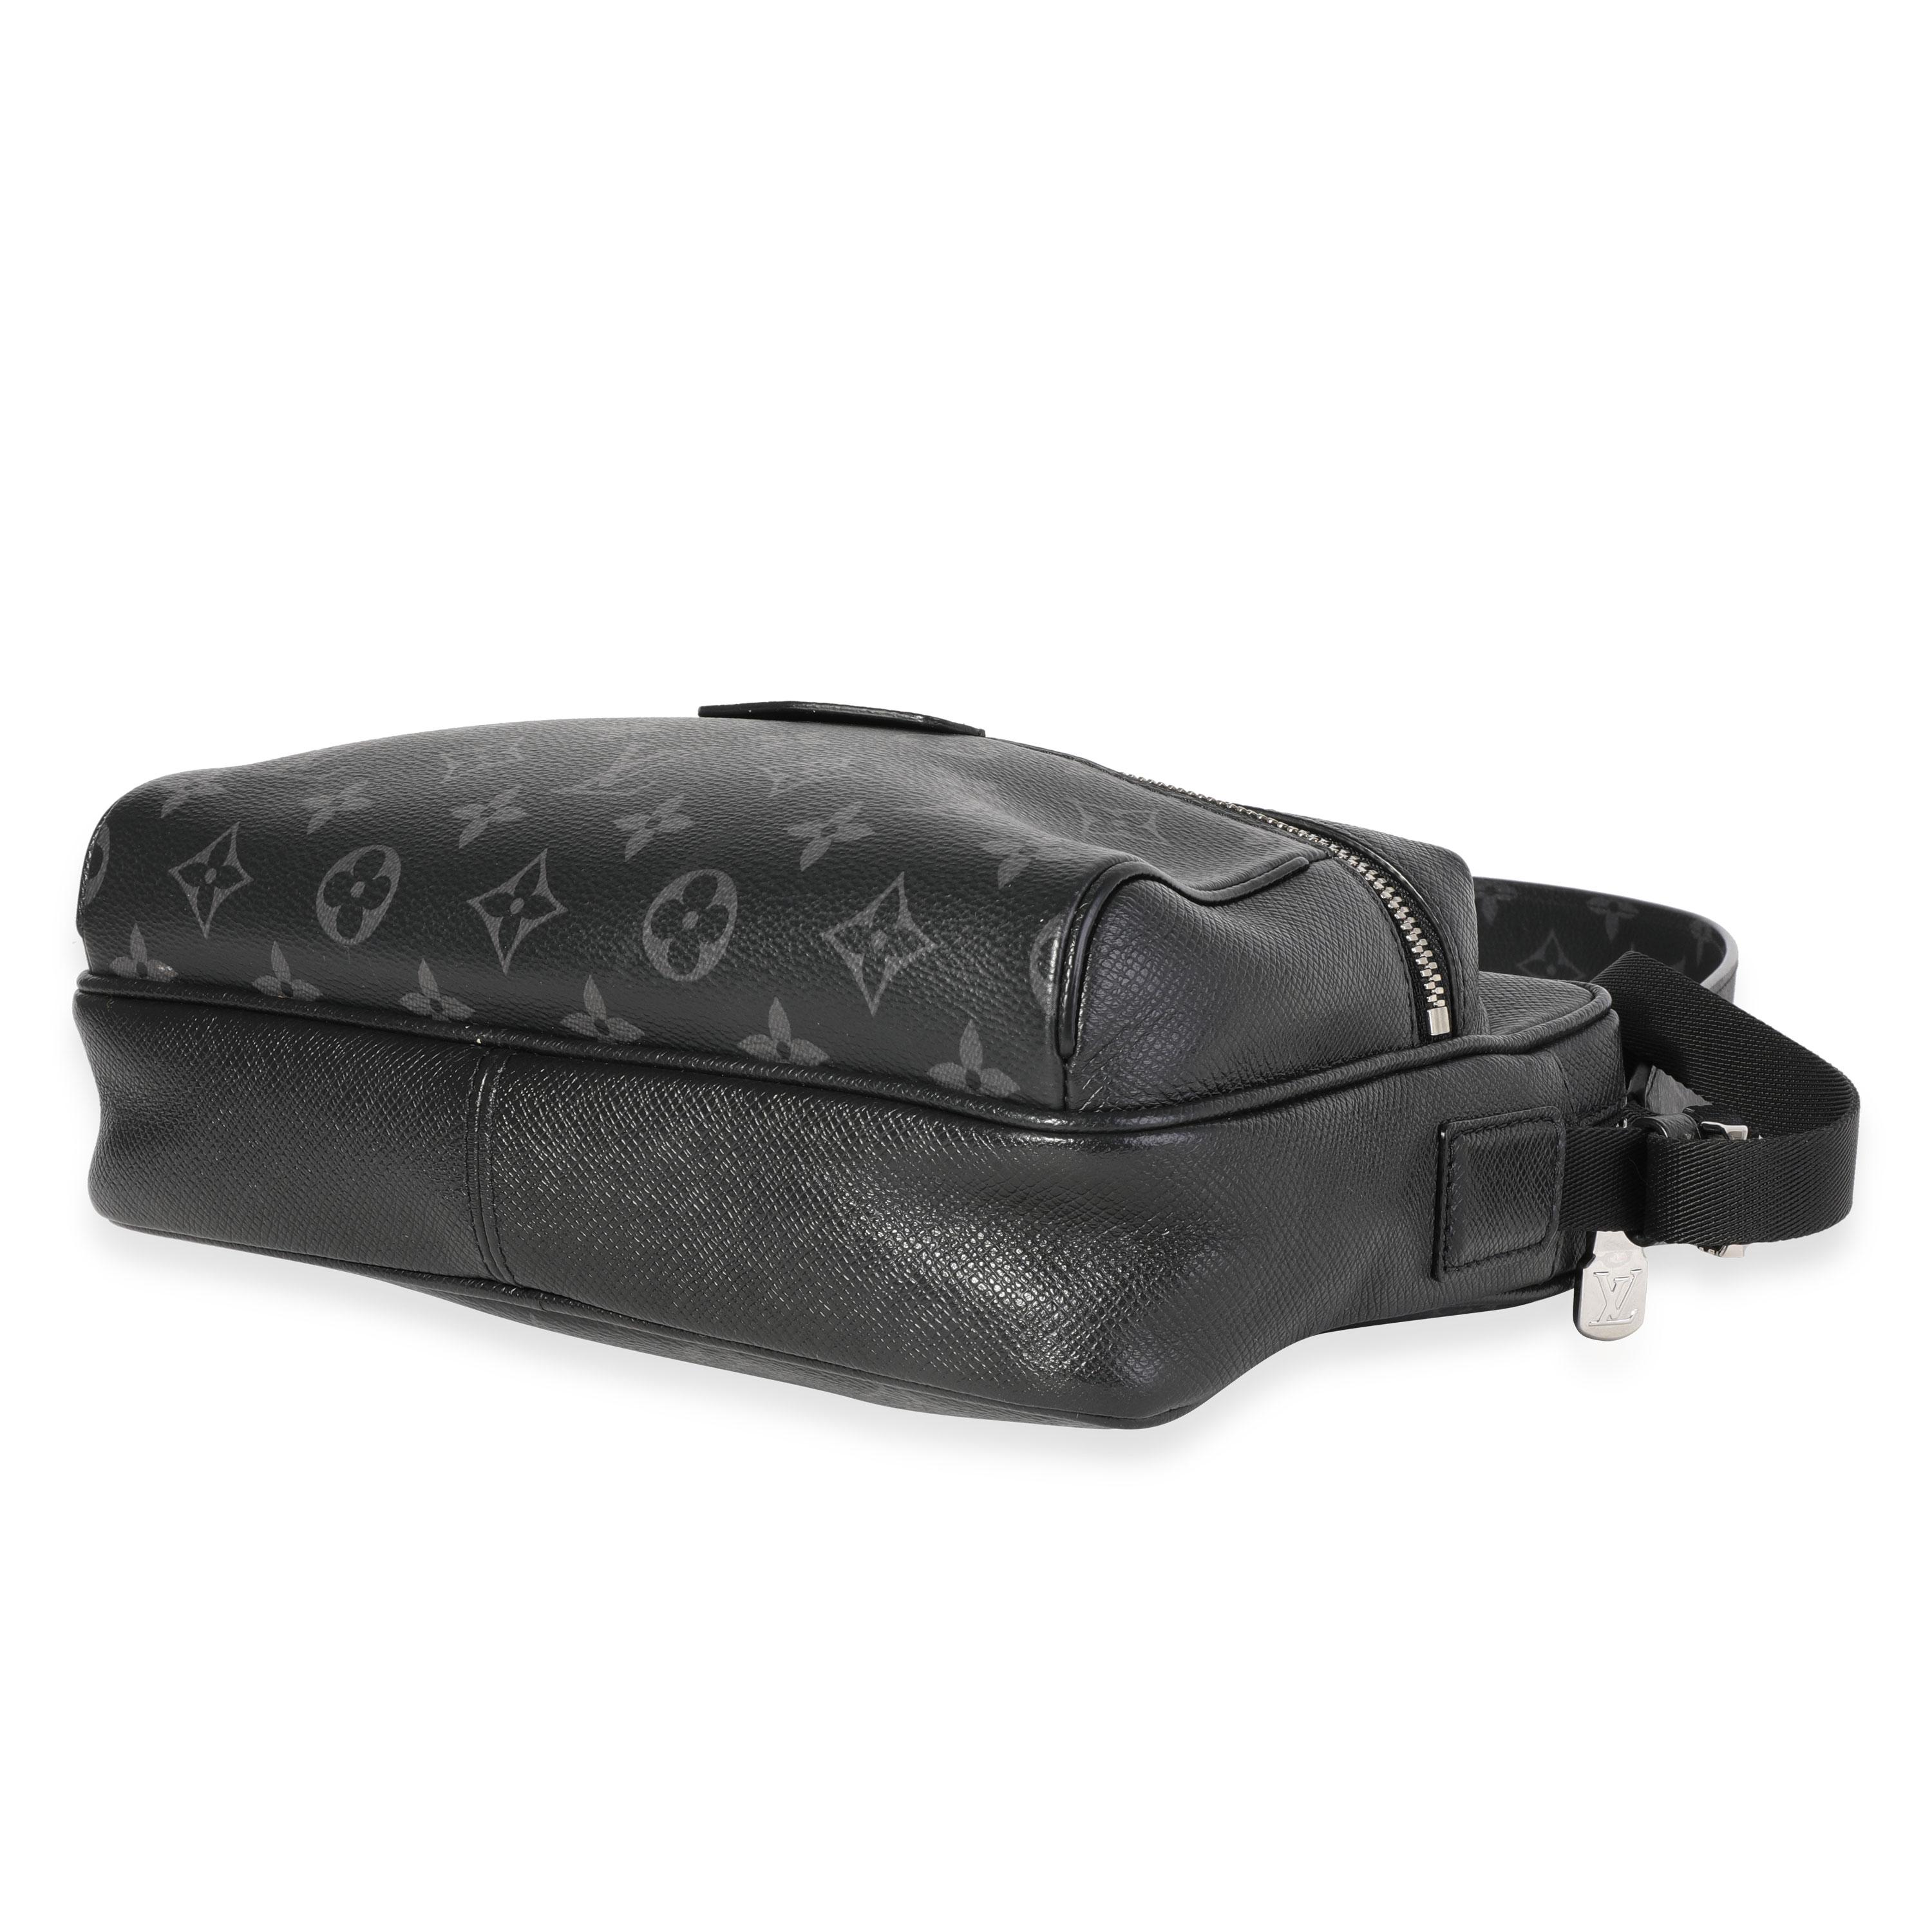 Louis Vuitton Black Taigarama & Monogram Eclipse Canvas Outdoor Messenger In Excellent Condition For Sale In New York, NY